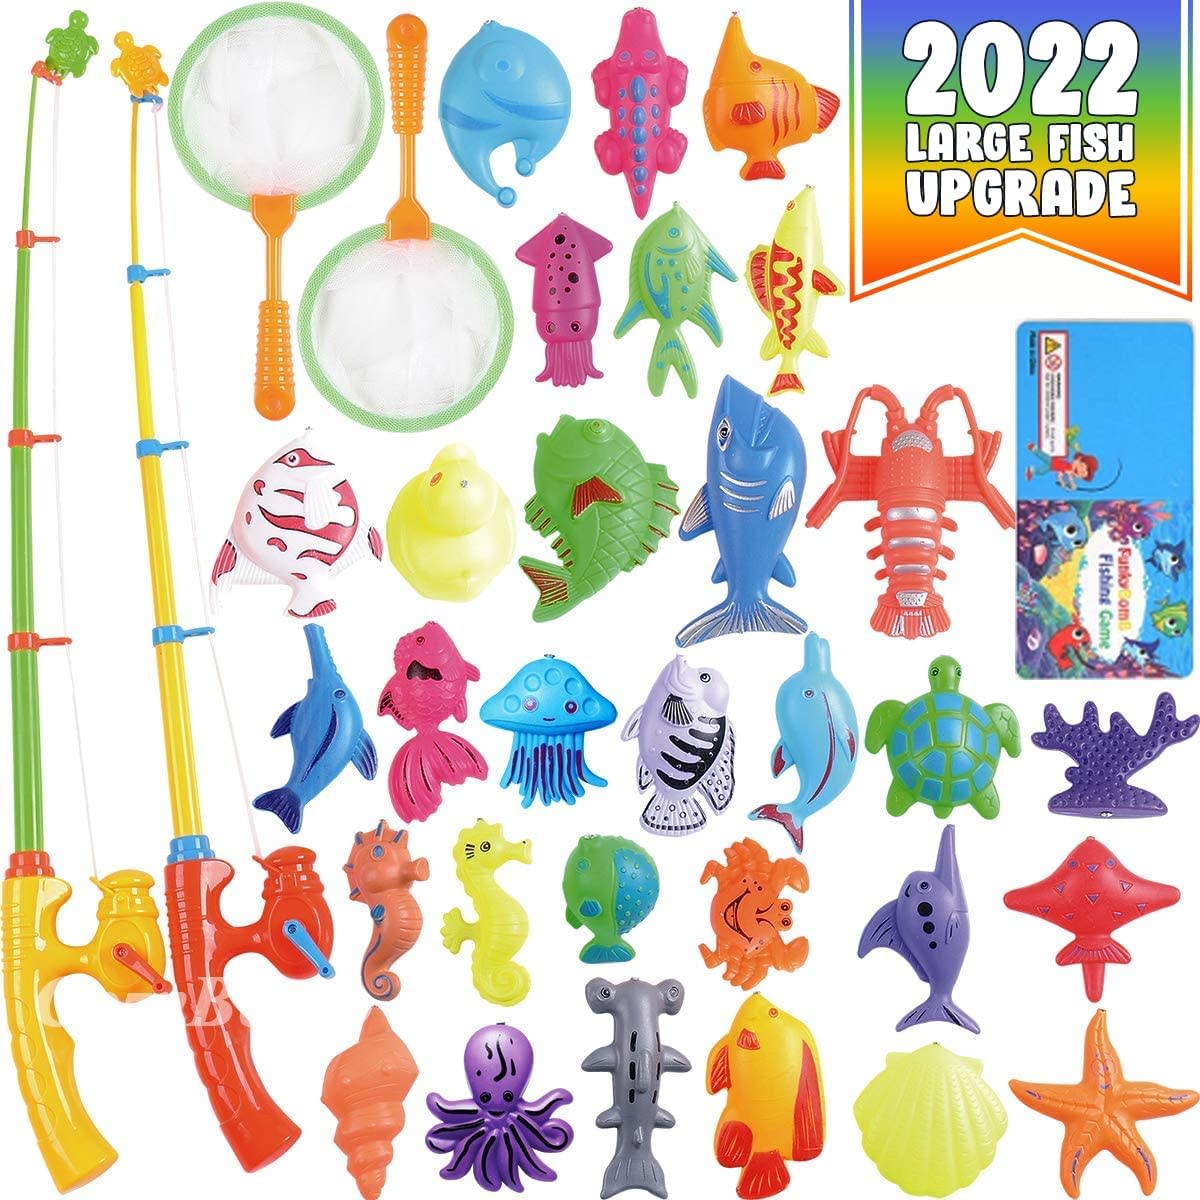 Magnetic Fishing Pool Toys Game for Kids - Water Table Bathtub Kiddie Party Toy with Pole Rod Net Plastic Floating Fish Toddler Color Ocean Sea Animals Gifts Age 3 4 5 6 Year Old